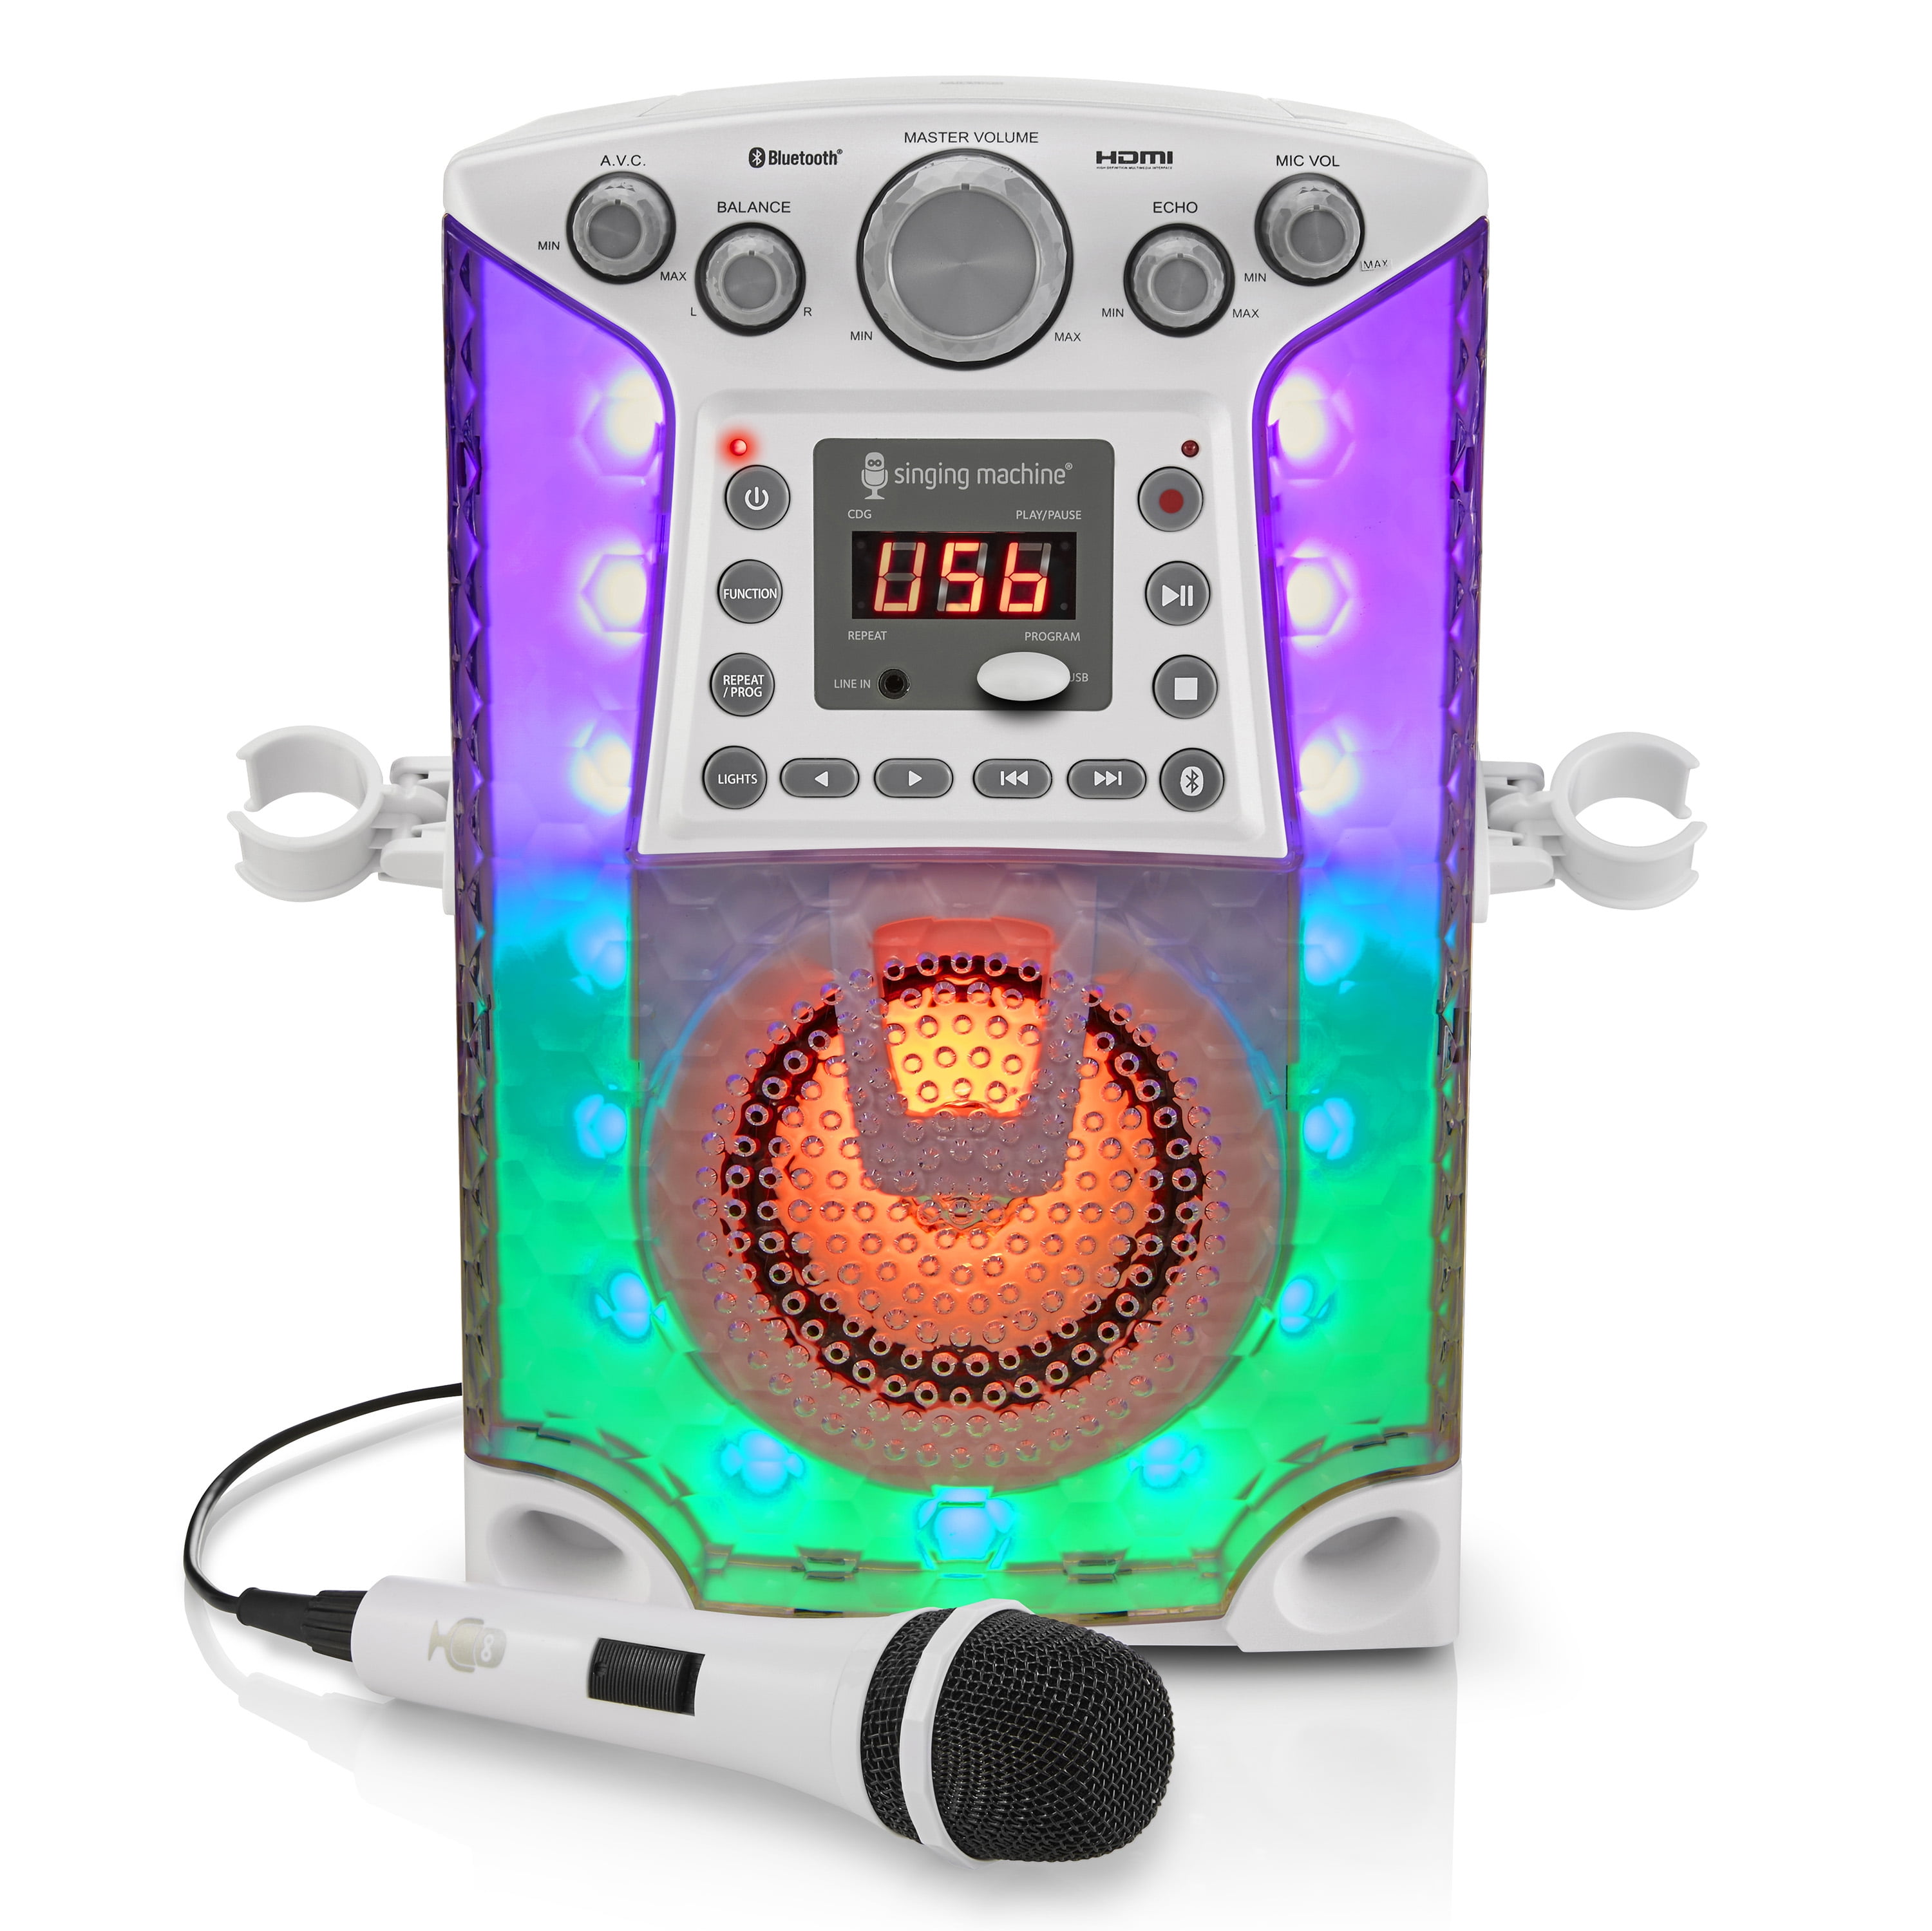 The Singing Machine Bluetooth CD+G Karaoke System with LED Lights & Microphone, White, SML633